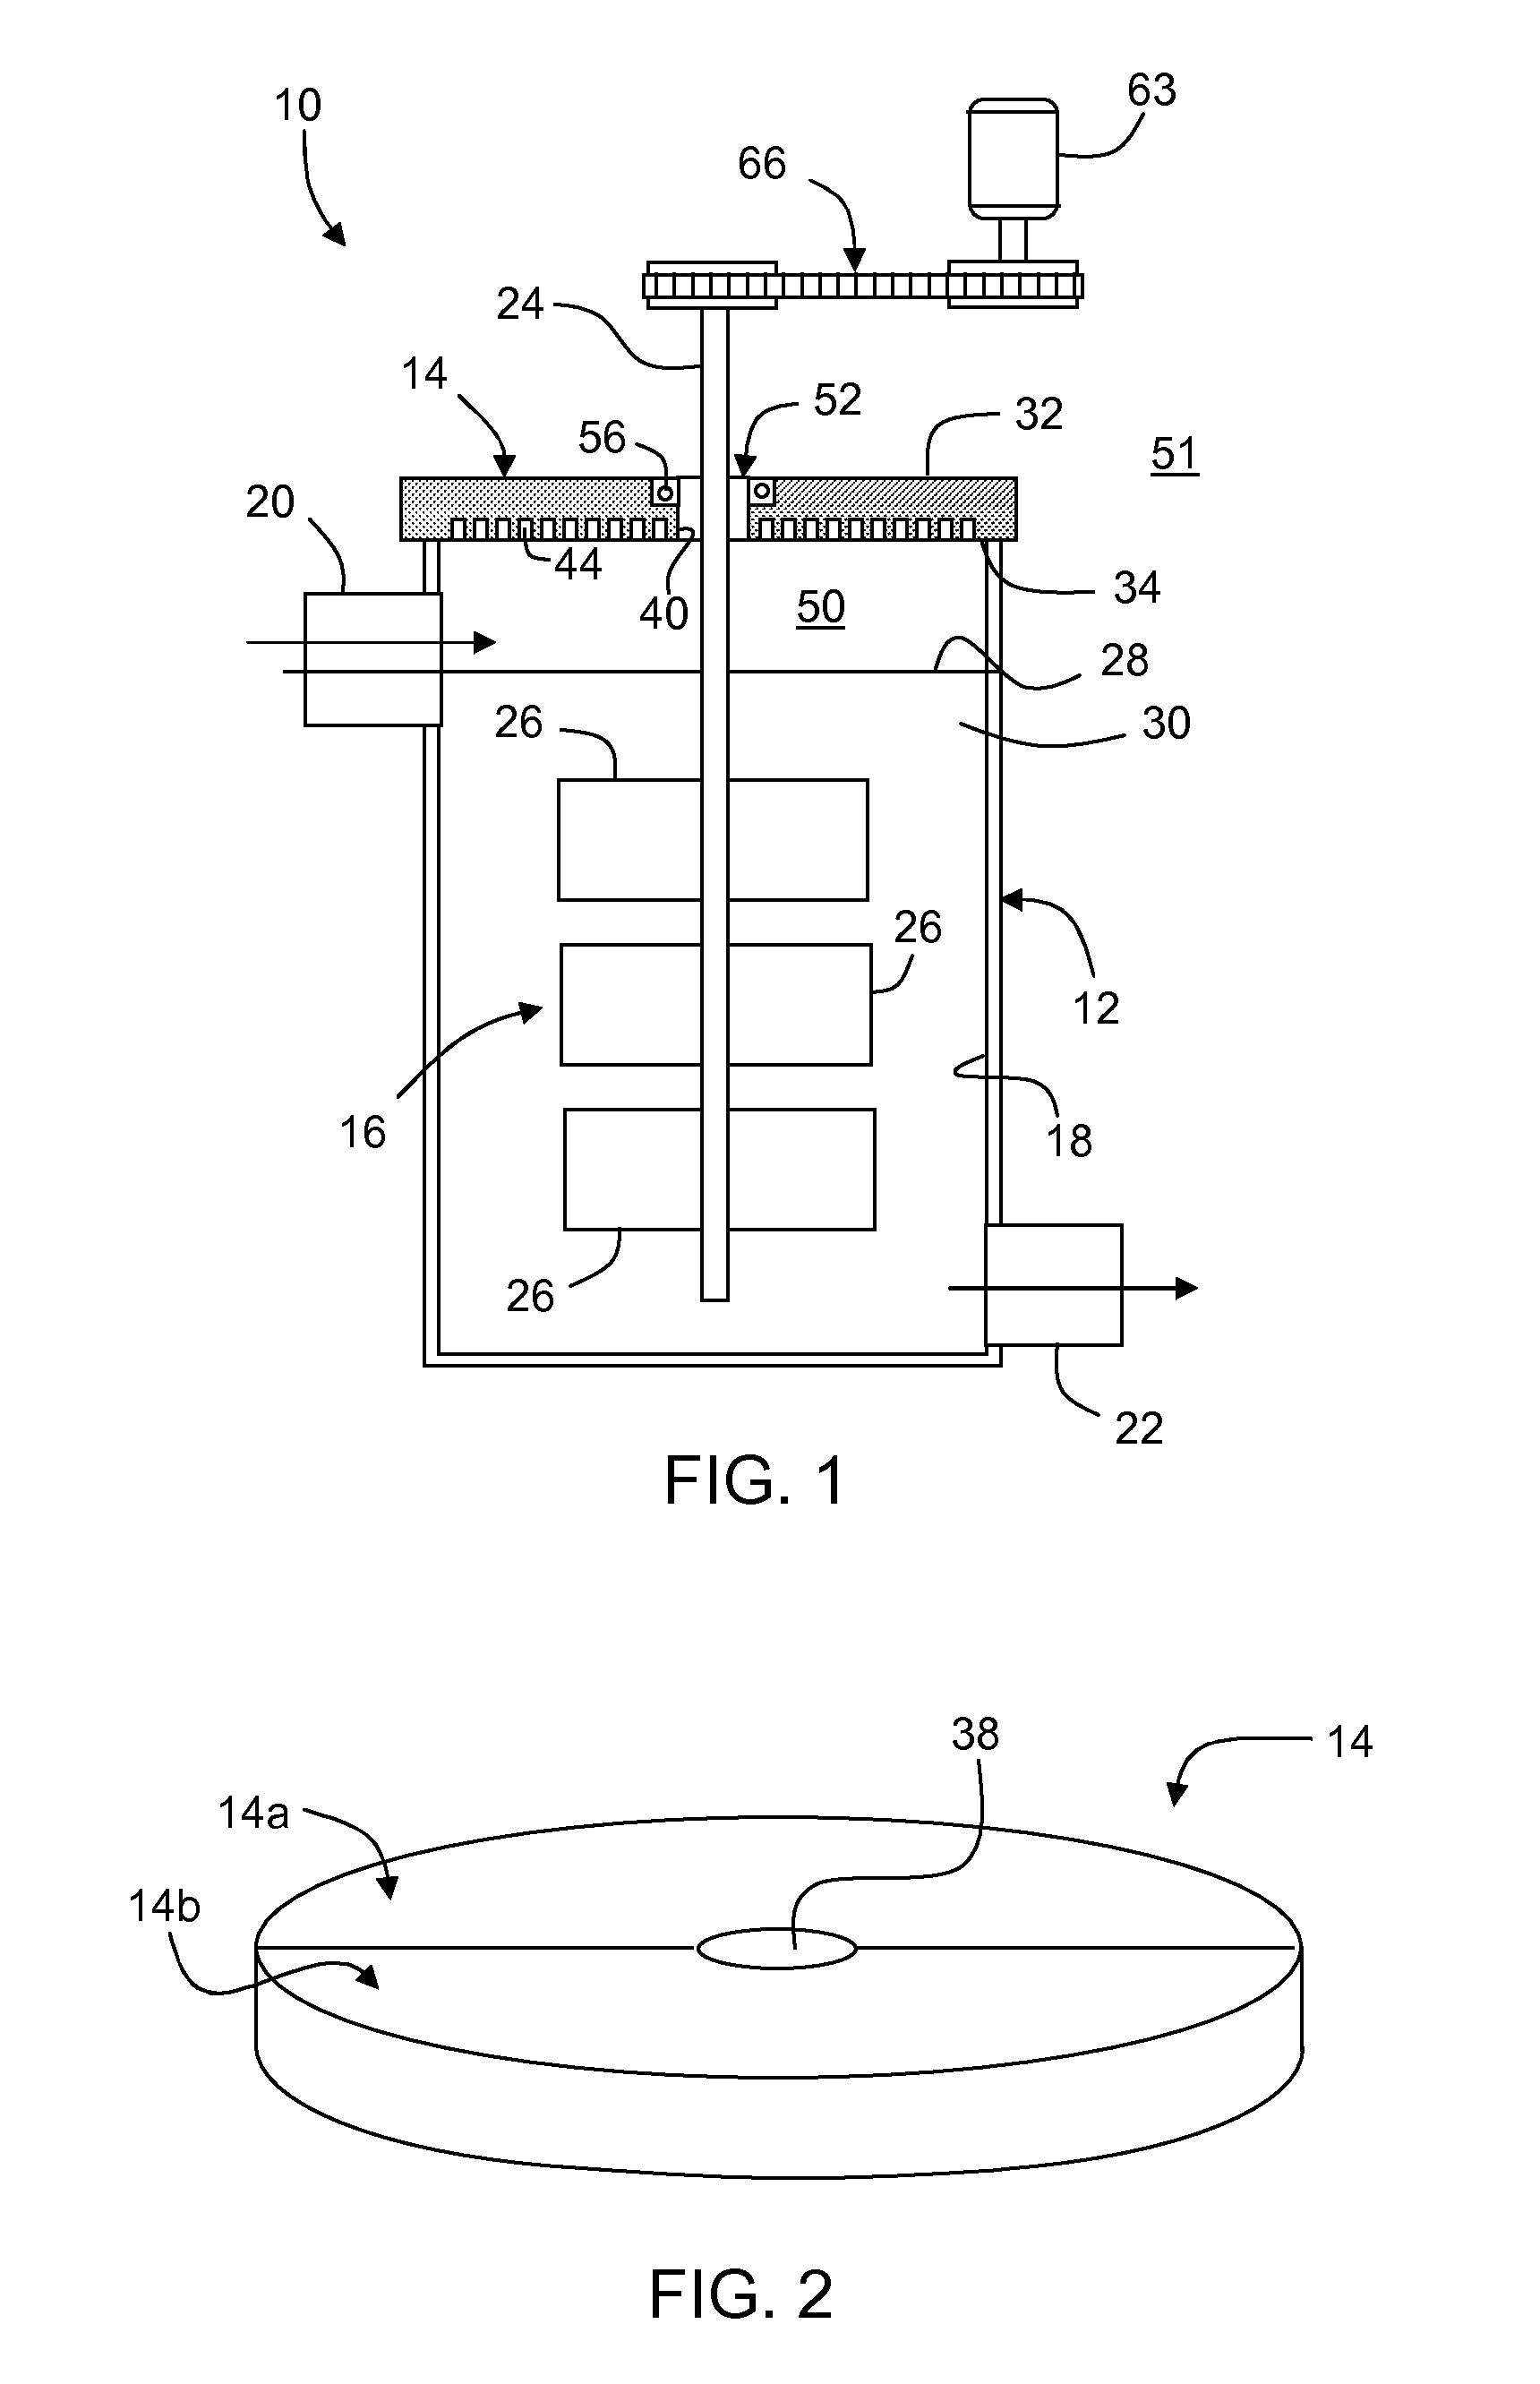 Method and apparatus for homogenizing a glass melt